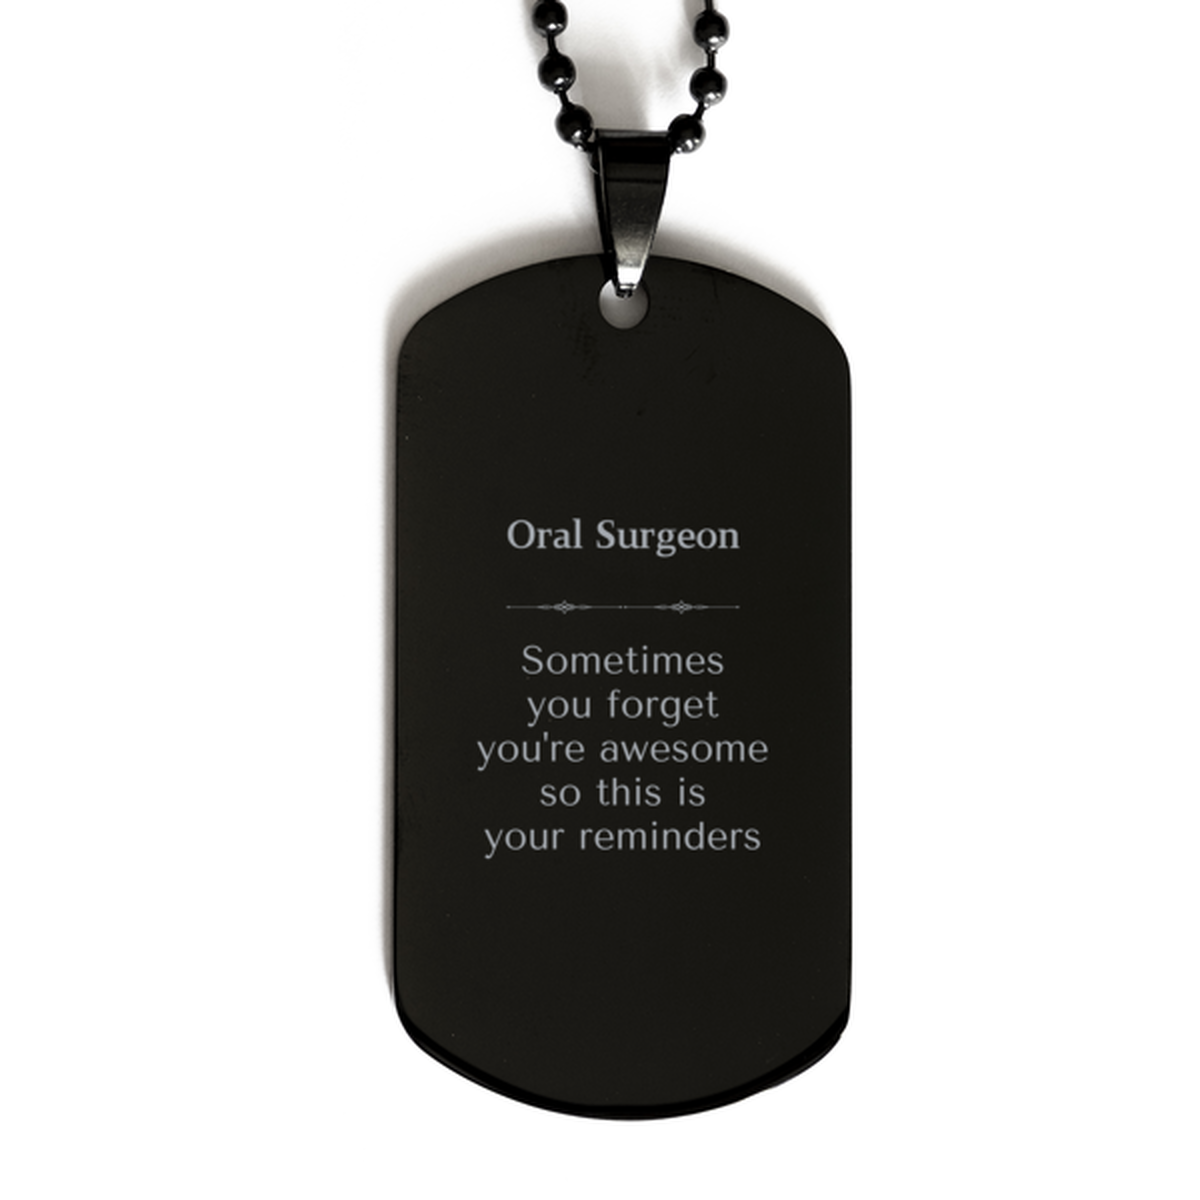 Sentimental Oral Surgeon Black Dog Tag, Oral Surgeon Sometimes you forget you're awesome so this is your reminders, Graduation Christmas Birthday Gifts for Oral Surgeon, Men, Women, Coworkers